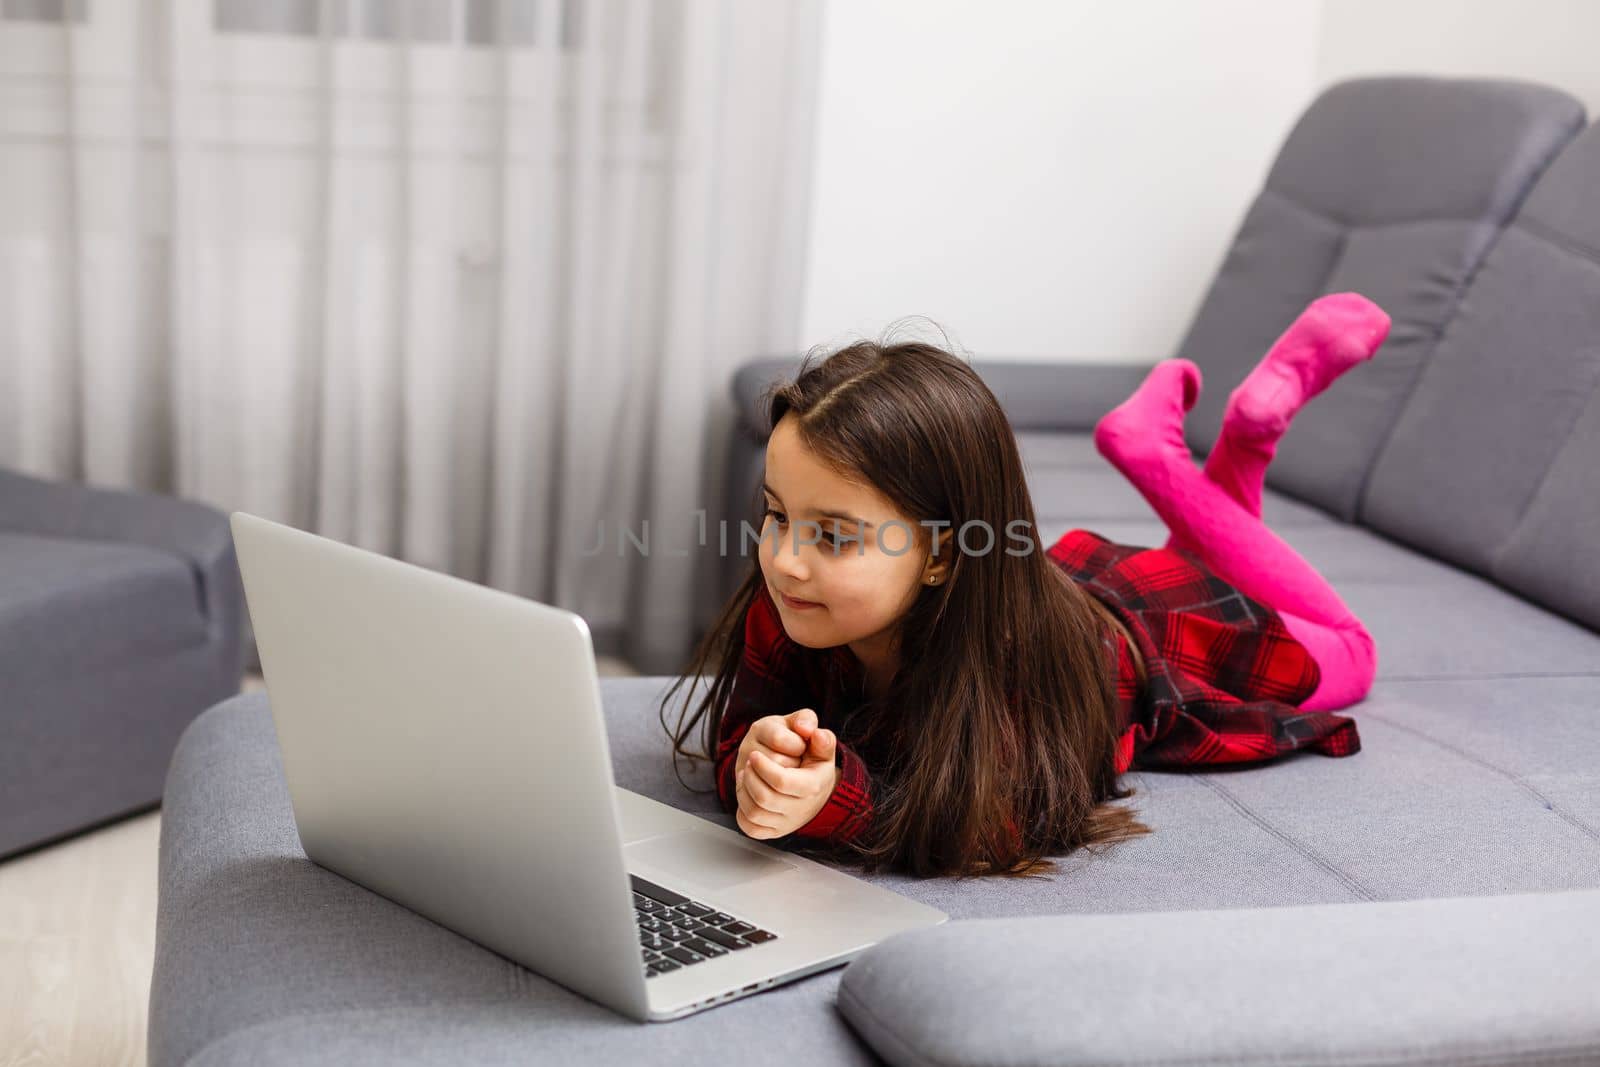 Little girl learning English indoors at online lesson by Andelov13